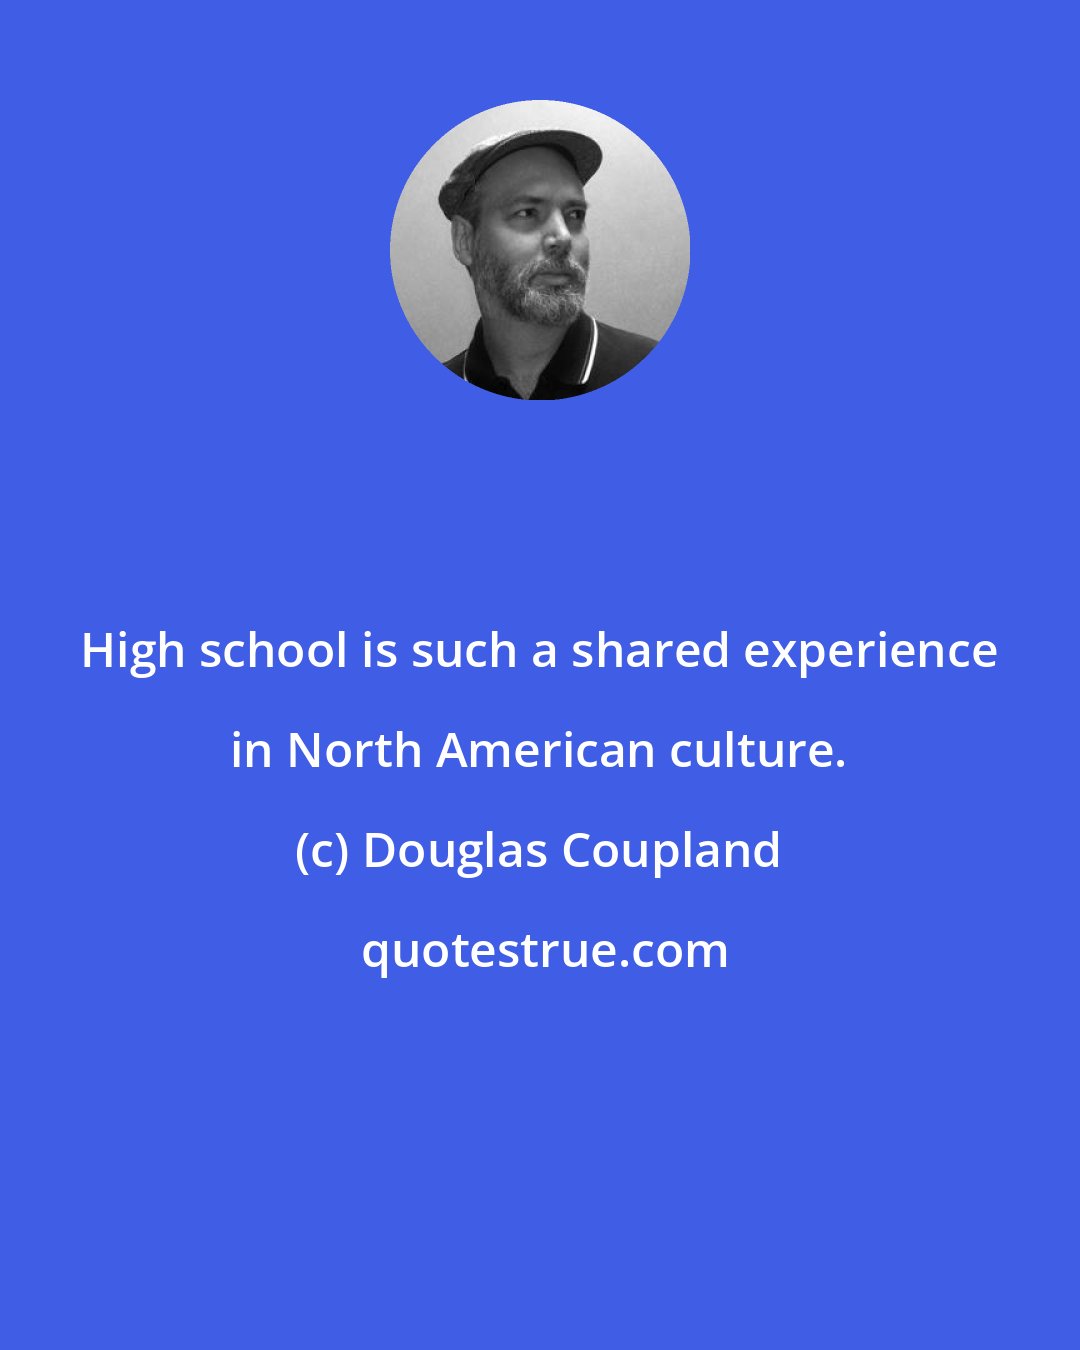 Douglas Coupland: High school is such a shared experience in North American culture.